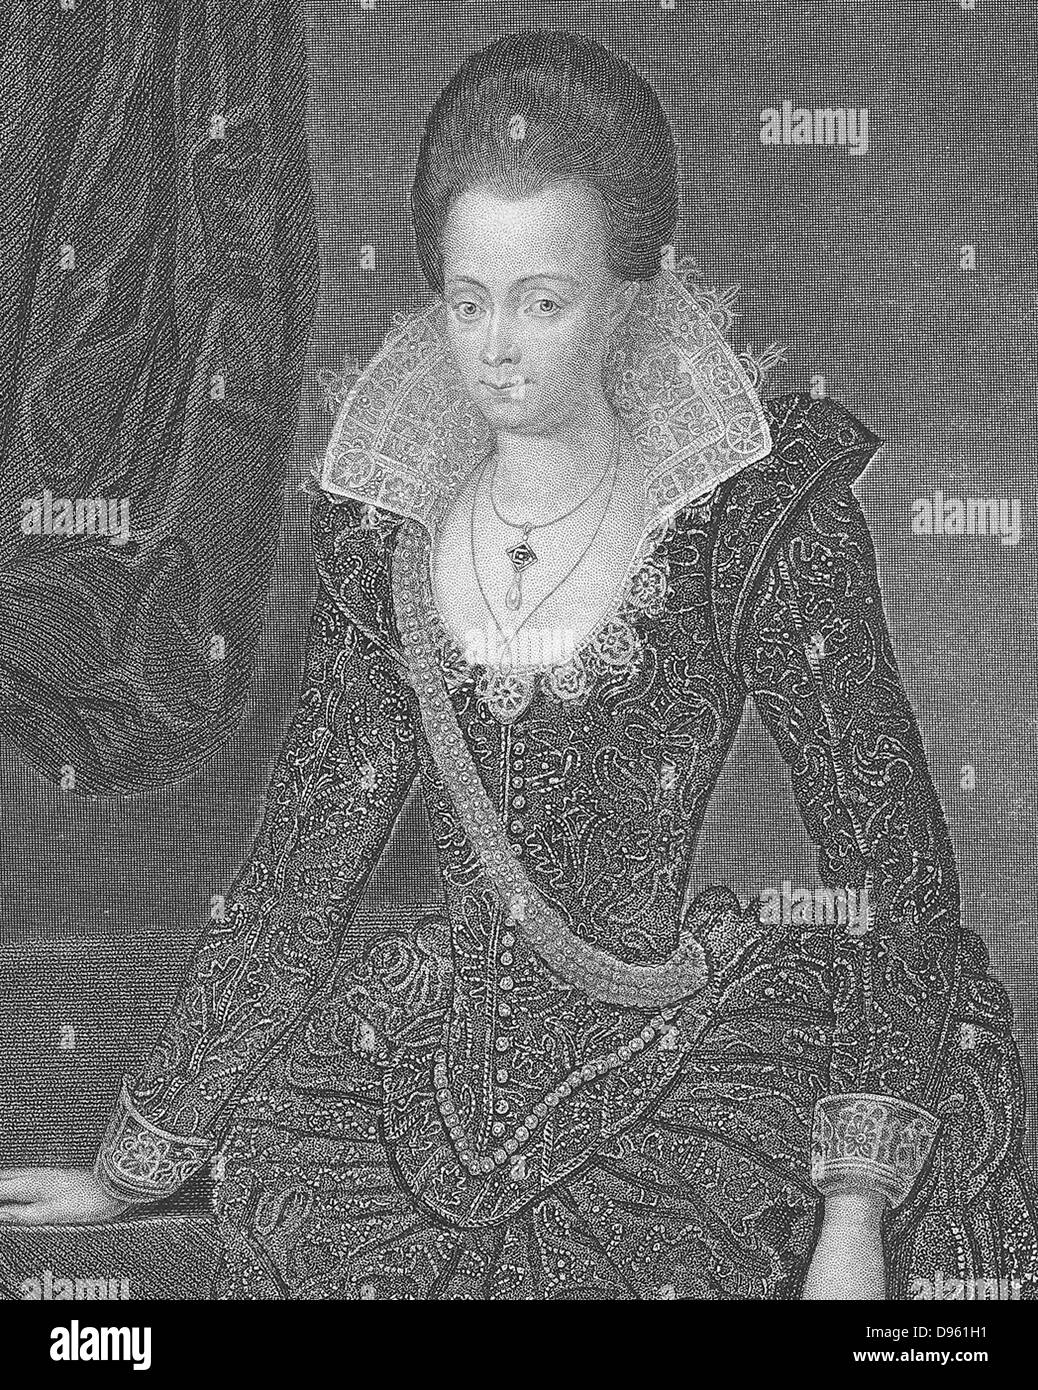 Arabella or Arbella Stuart (1575-1615). During  the reign of Elizabeth I she was second in line to the English throne after James VI of Scotland/James I of England. Died insane in the Tower of London. Engraving Stock Photo